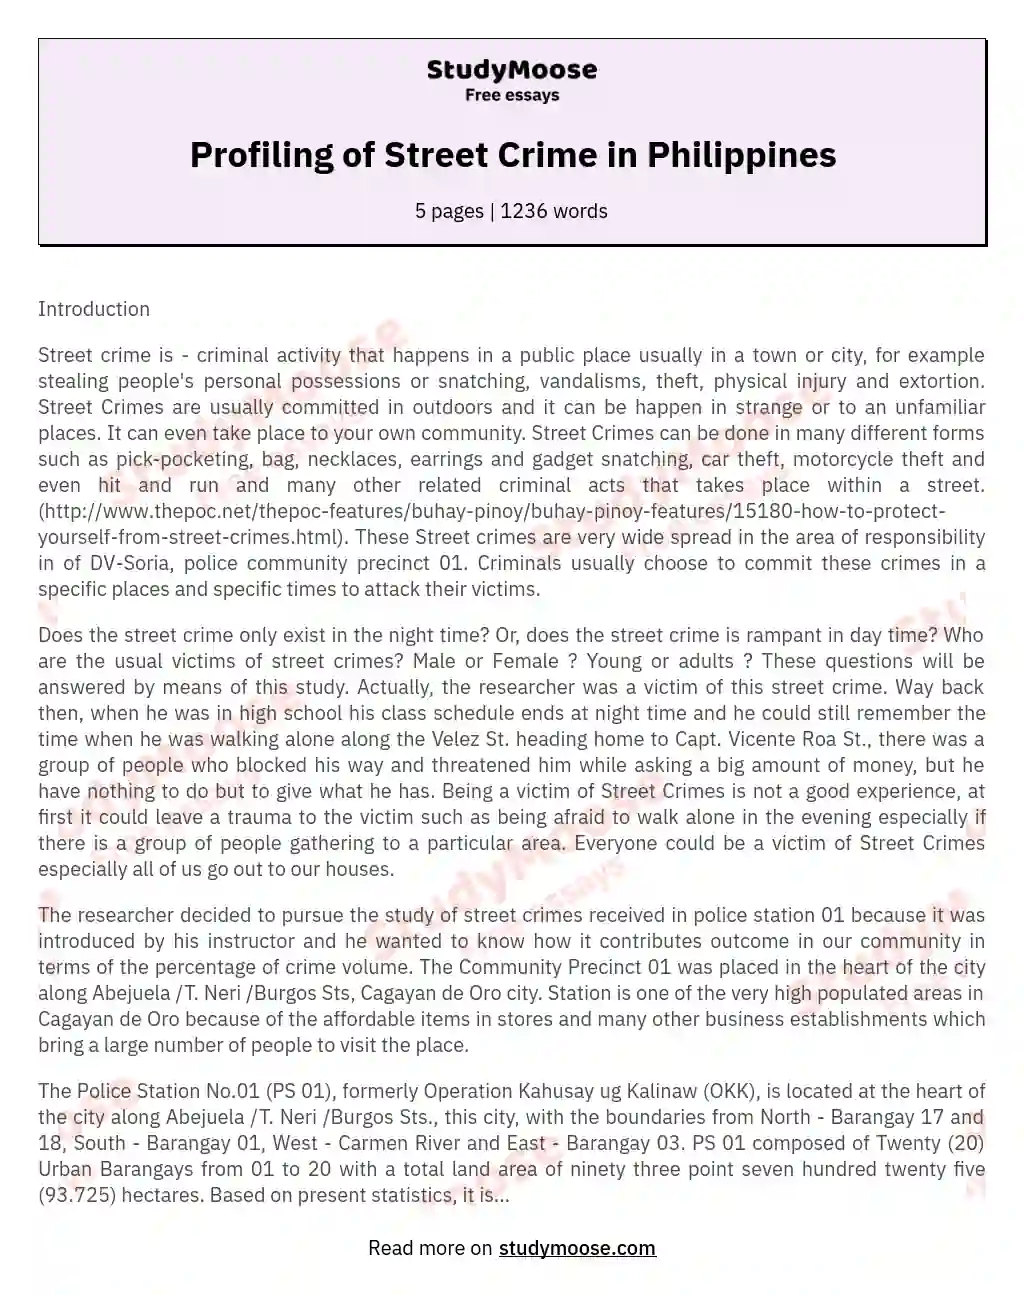 Profiling of Street Crime in Philippines essay